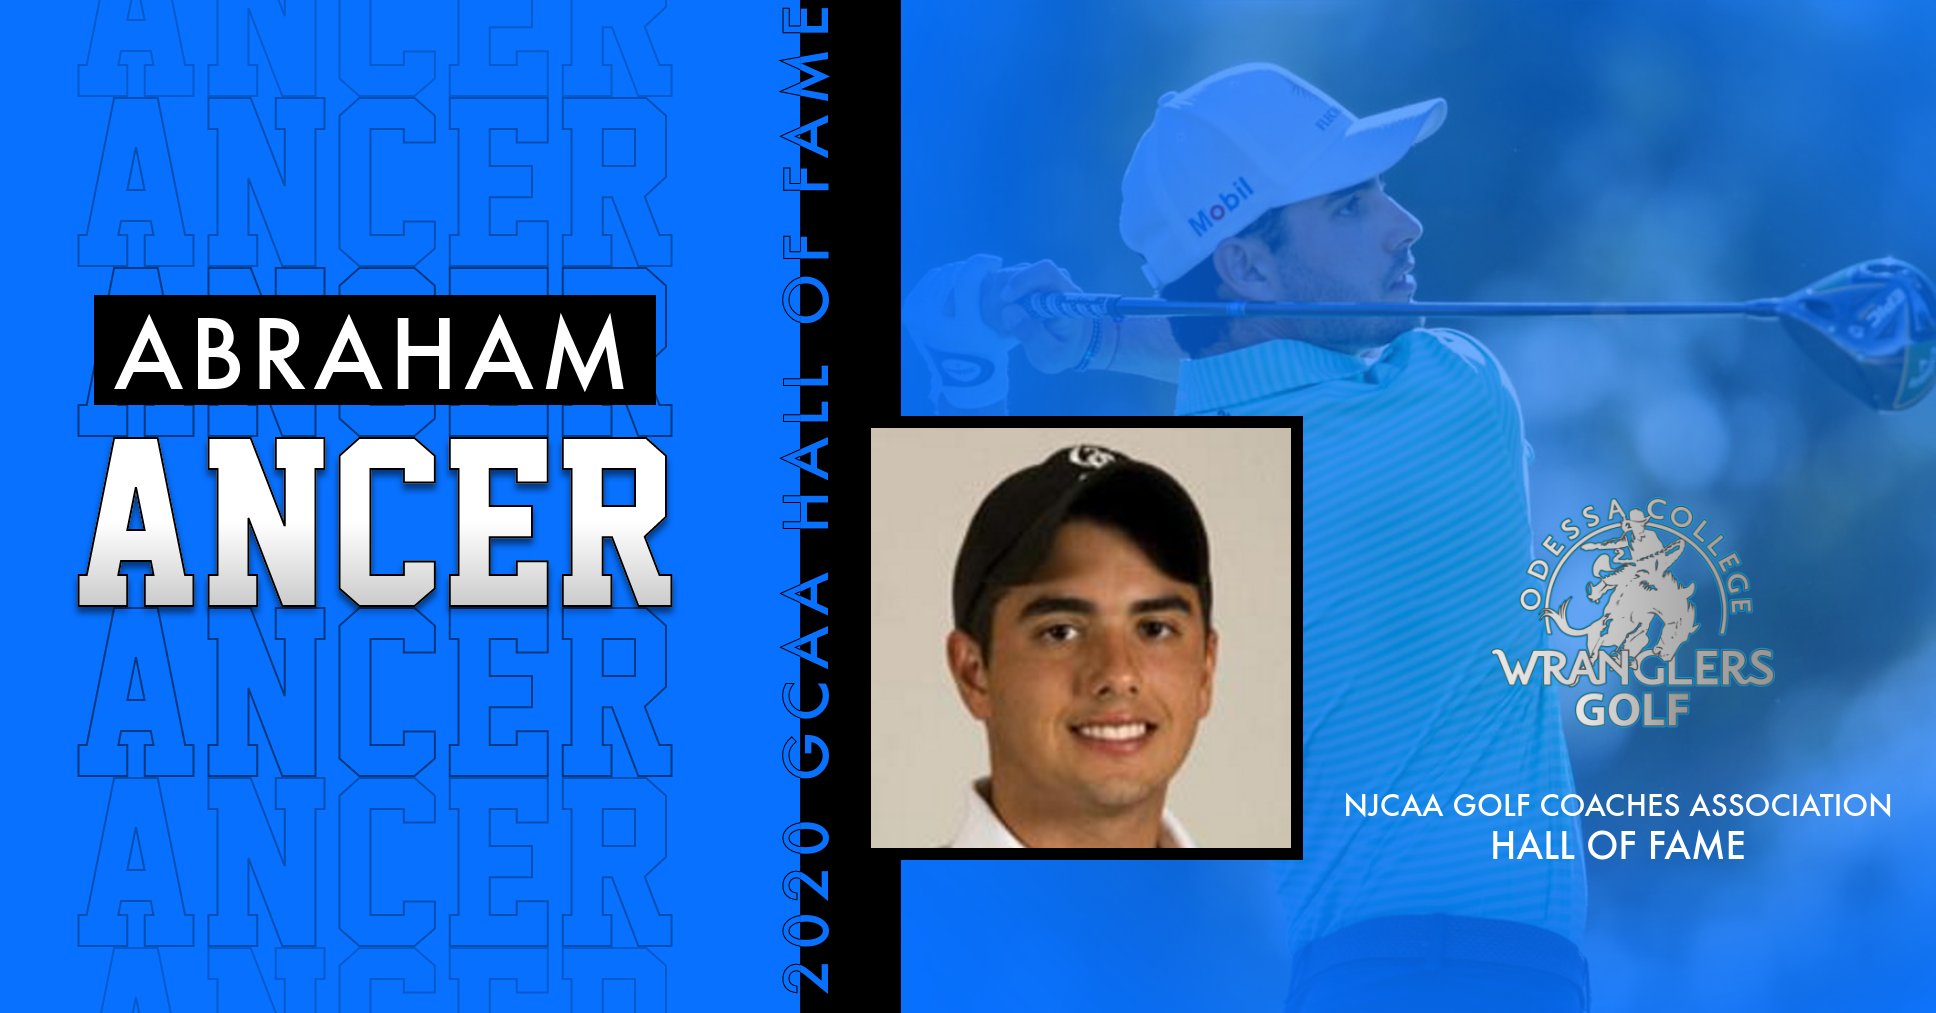 Former OC Golfer Abraham Ancer named to GCAA 2020 Hall of Fame Class